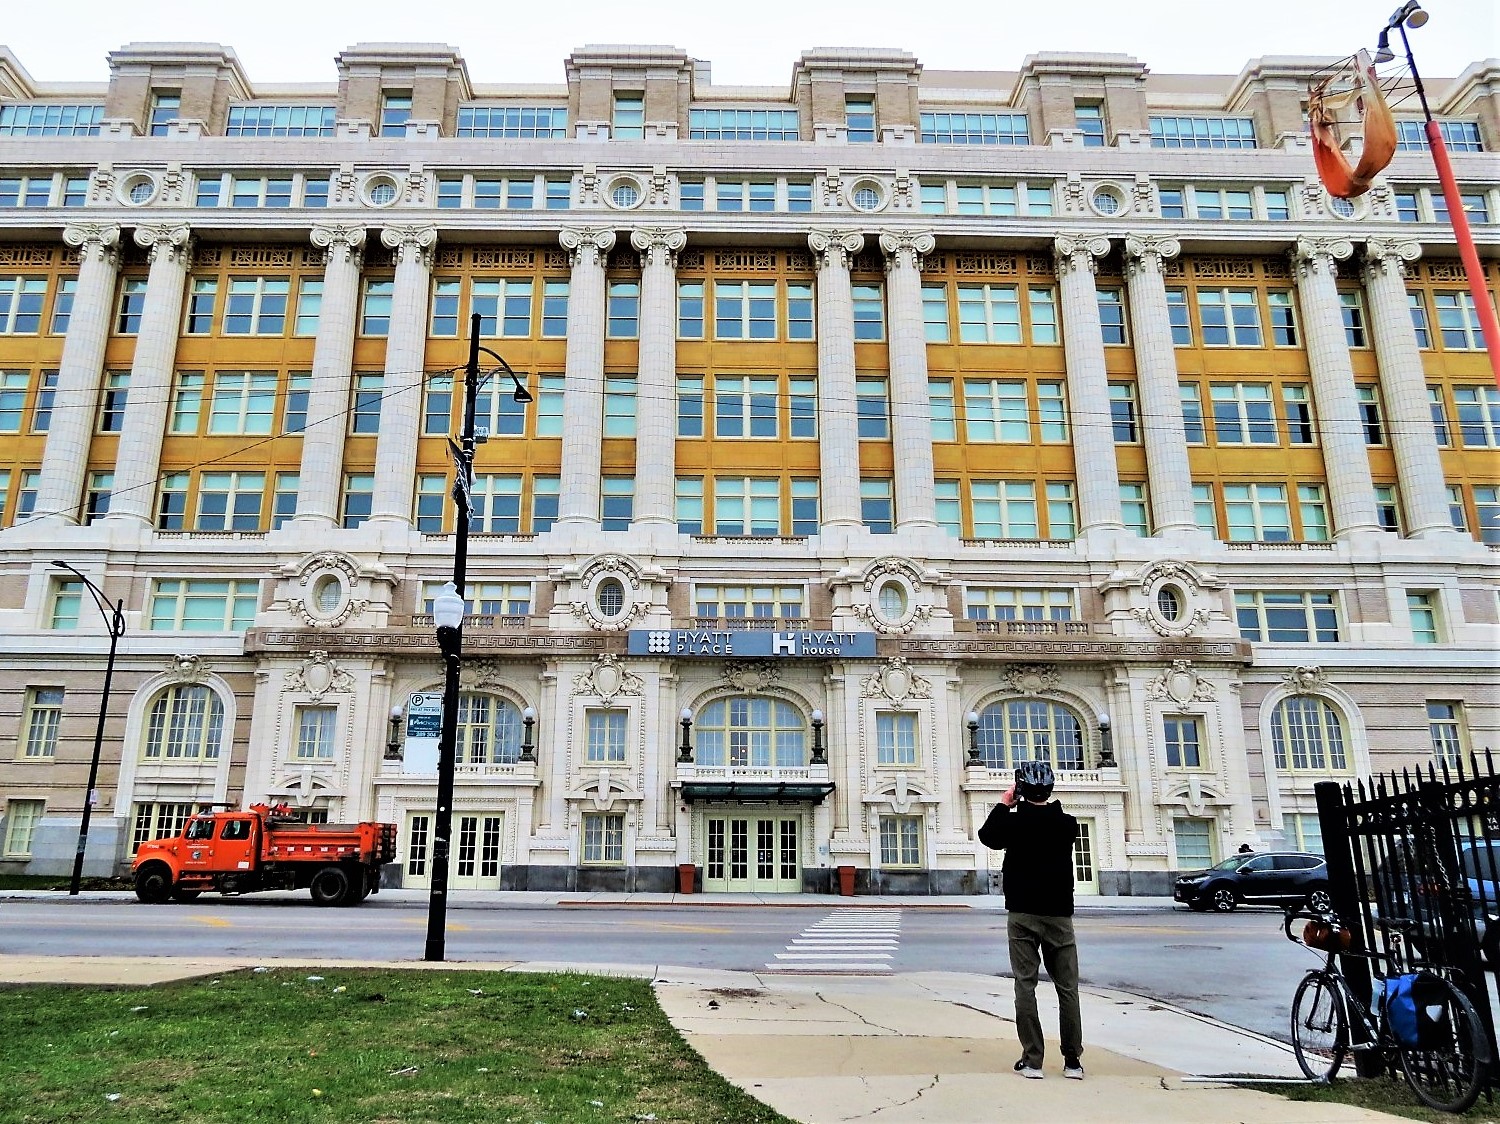 A CBA bike tour rider taking a picture of the large mass Beaux Arts style old Cook County Hospital, restored as Hyatt Place hotel.